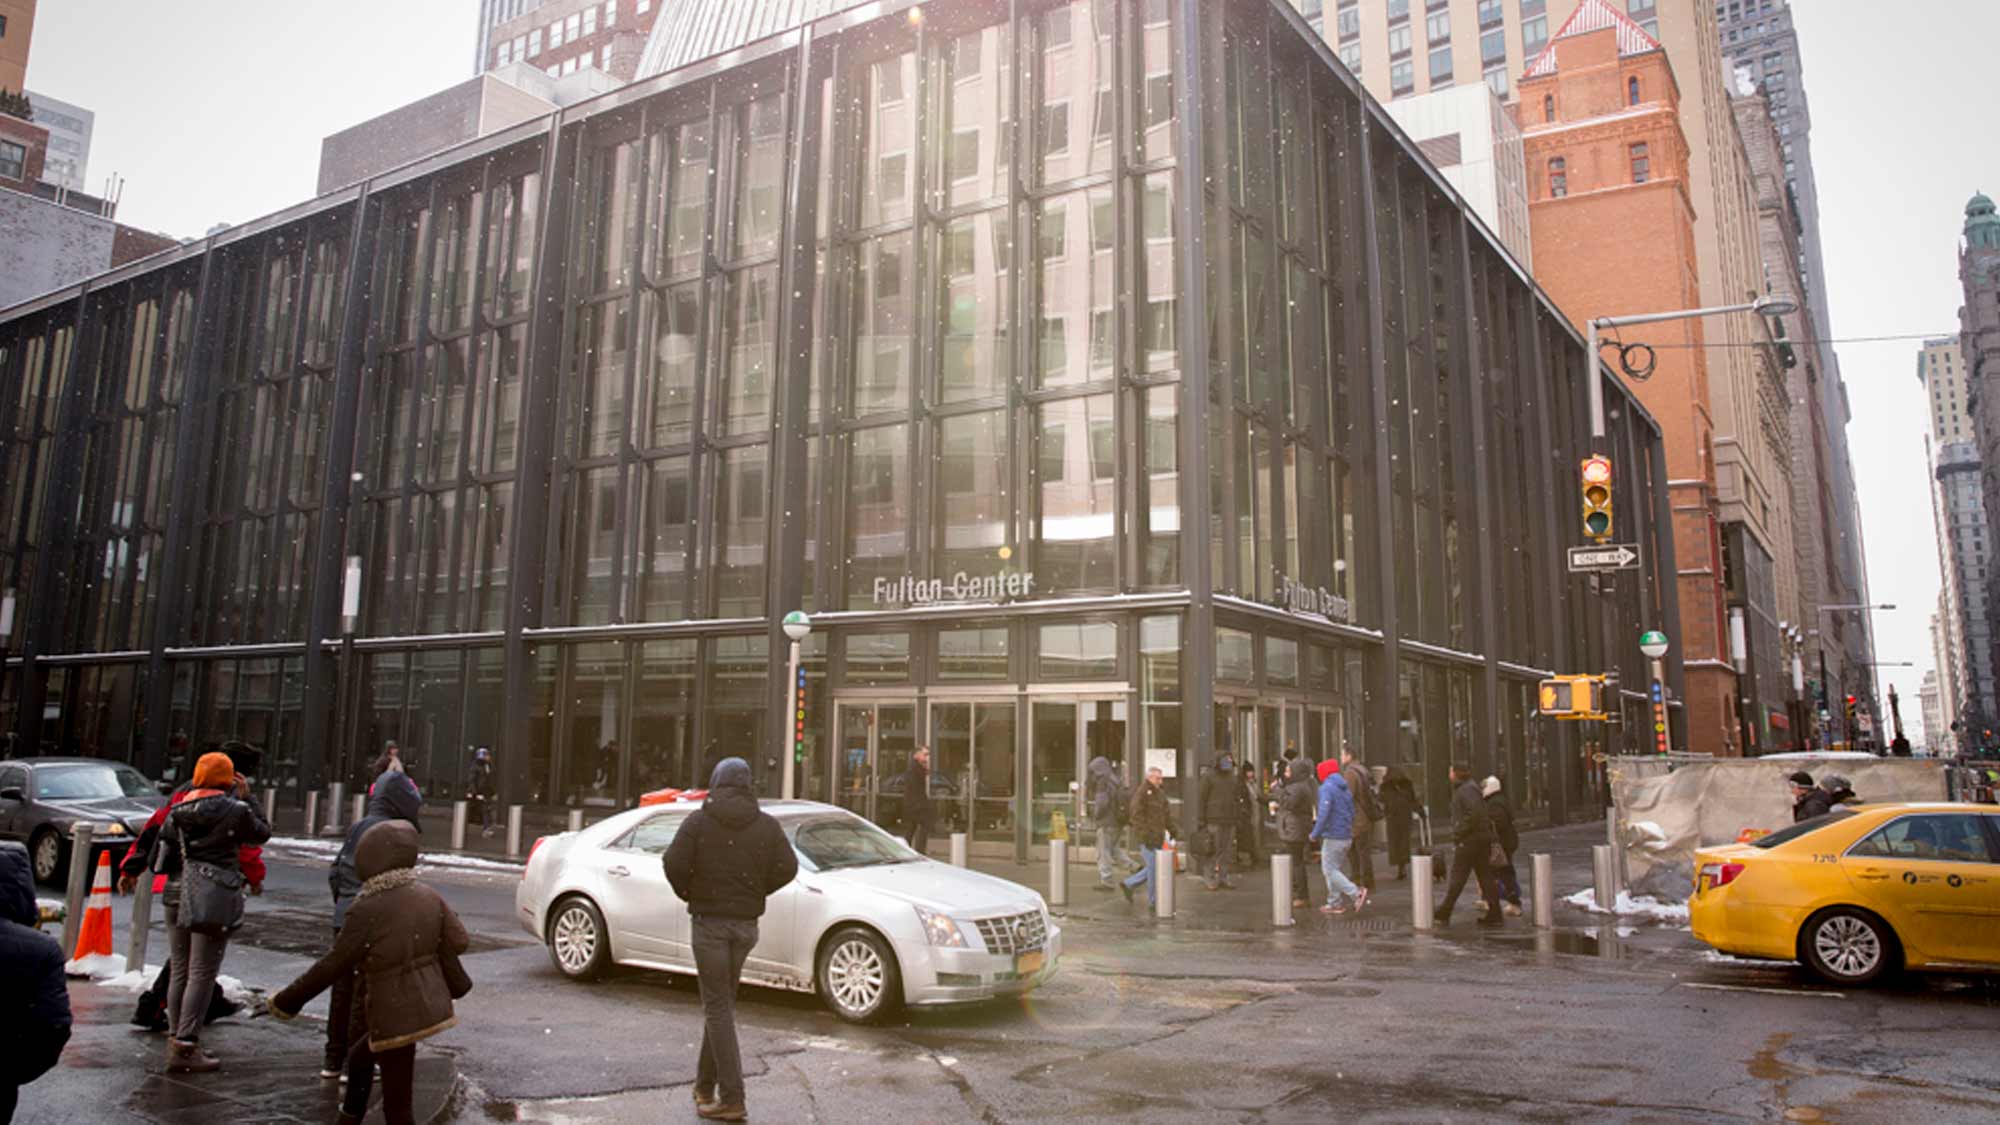 Fulton Center unites 12 subway lines and six stations